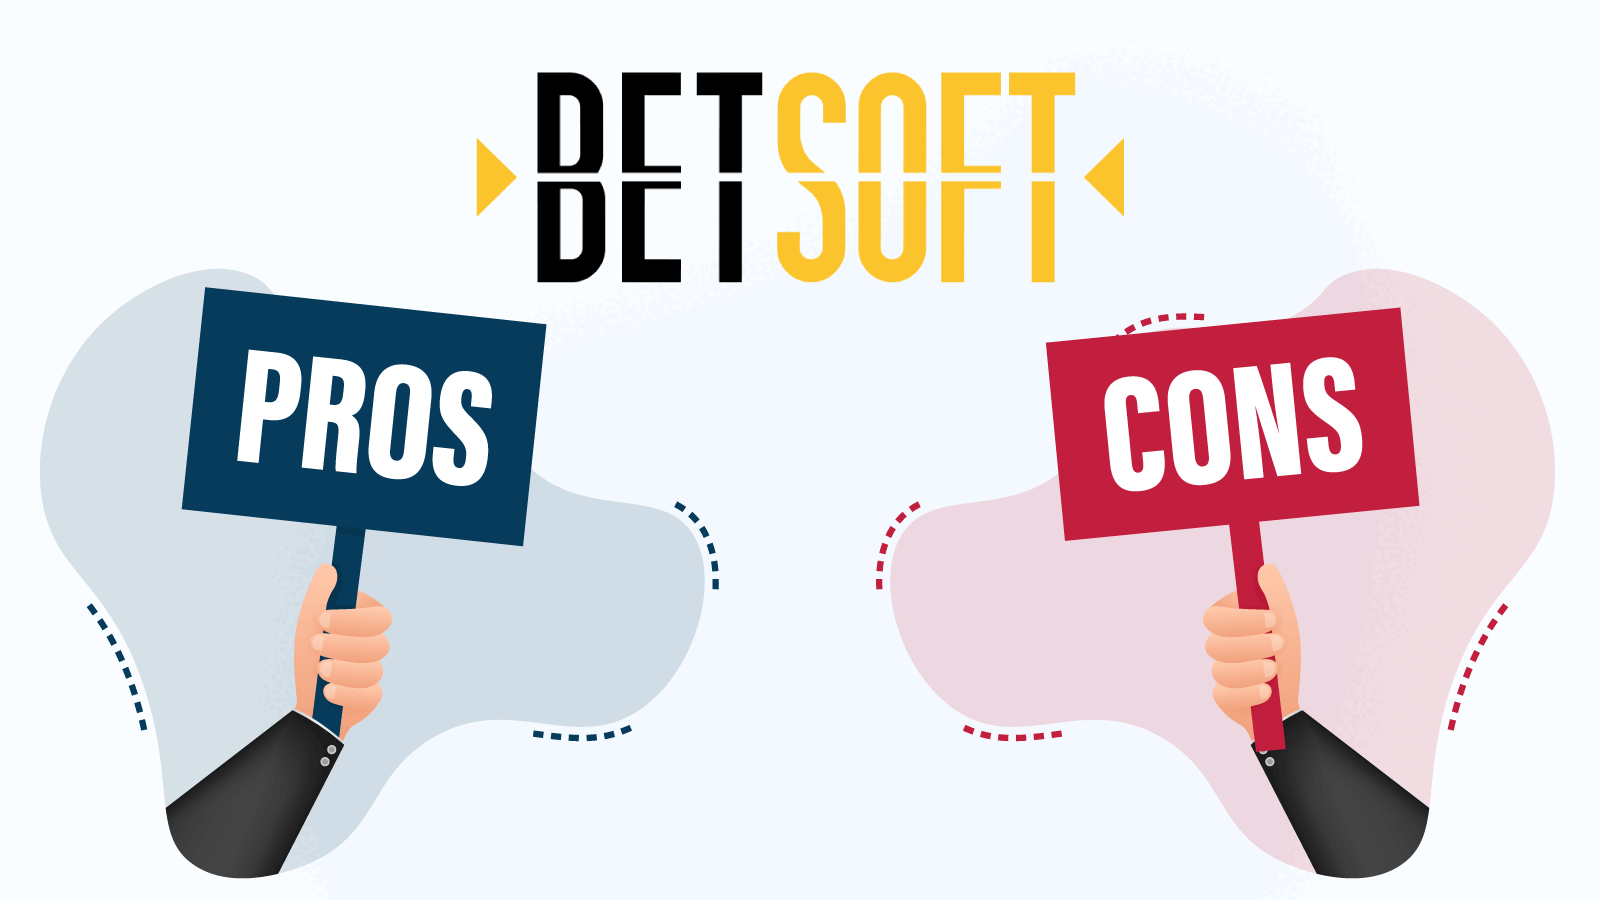 Betsoft Pros and Cons